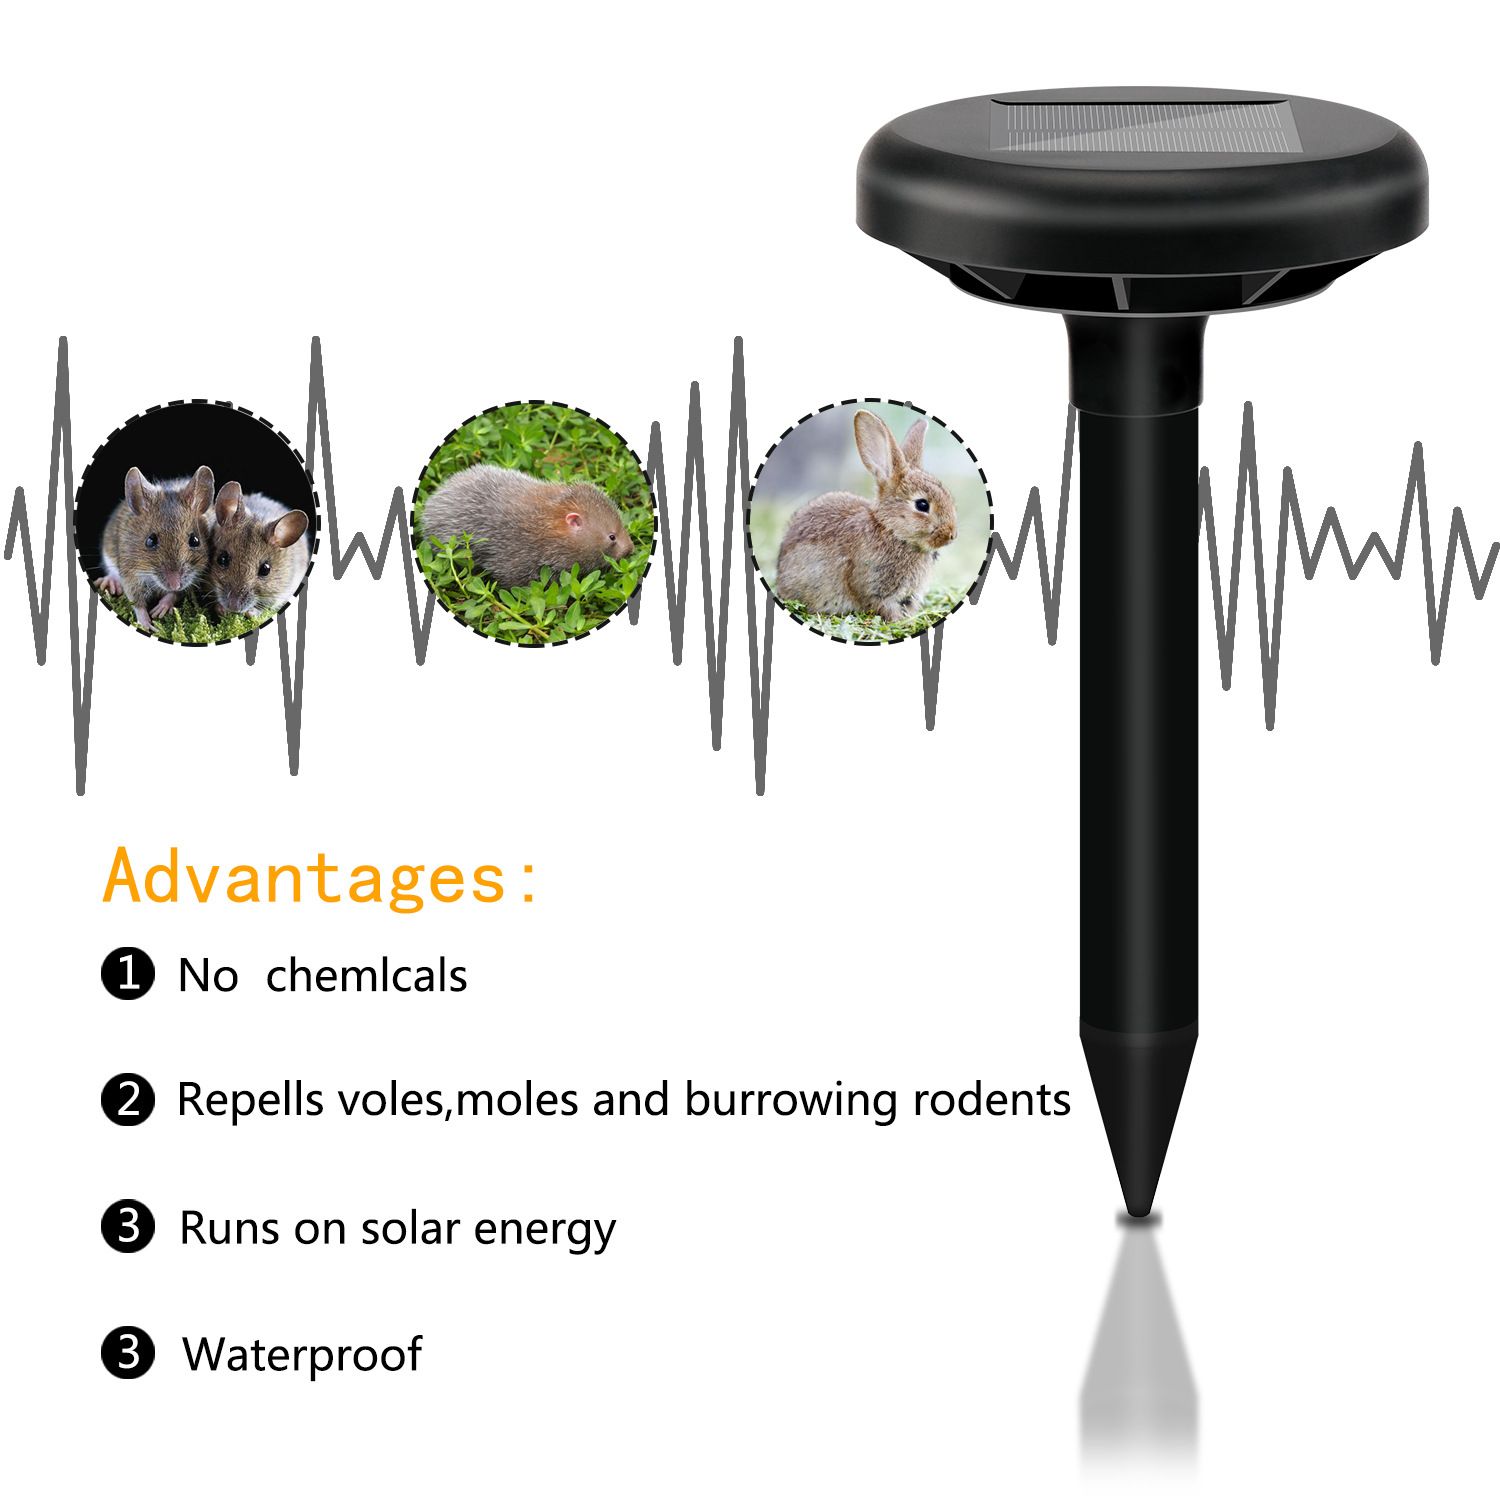 Ultrasonic-Solar-Mouse-Animal-Repeller-Energy-saving-And-Environmental-Protection-Of-Home-Electronic-1727130